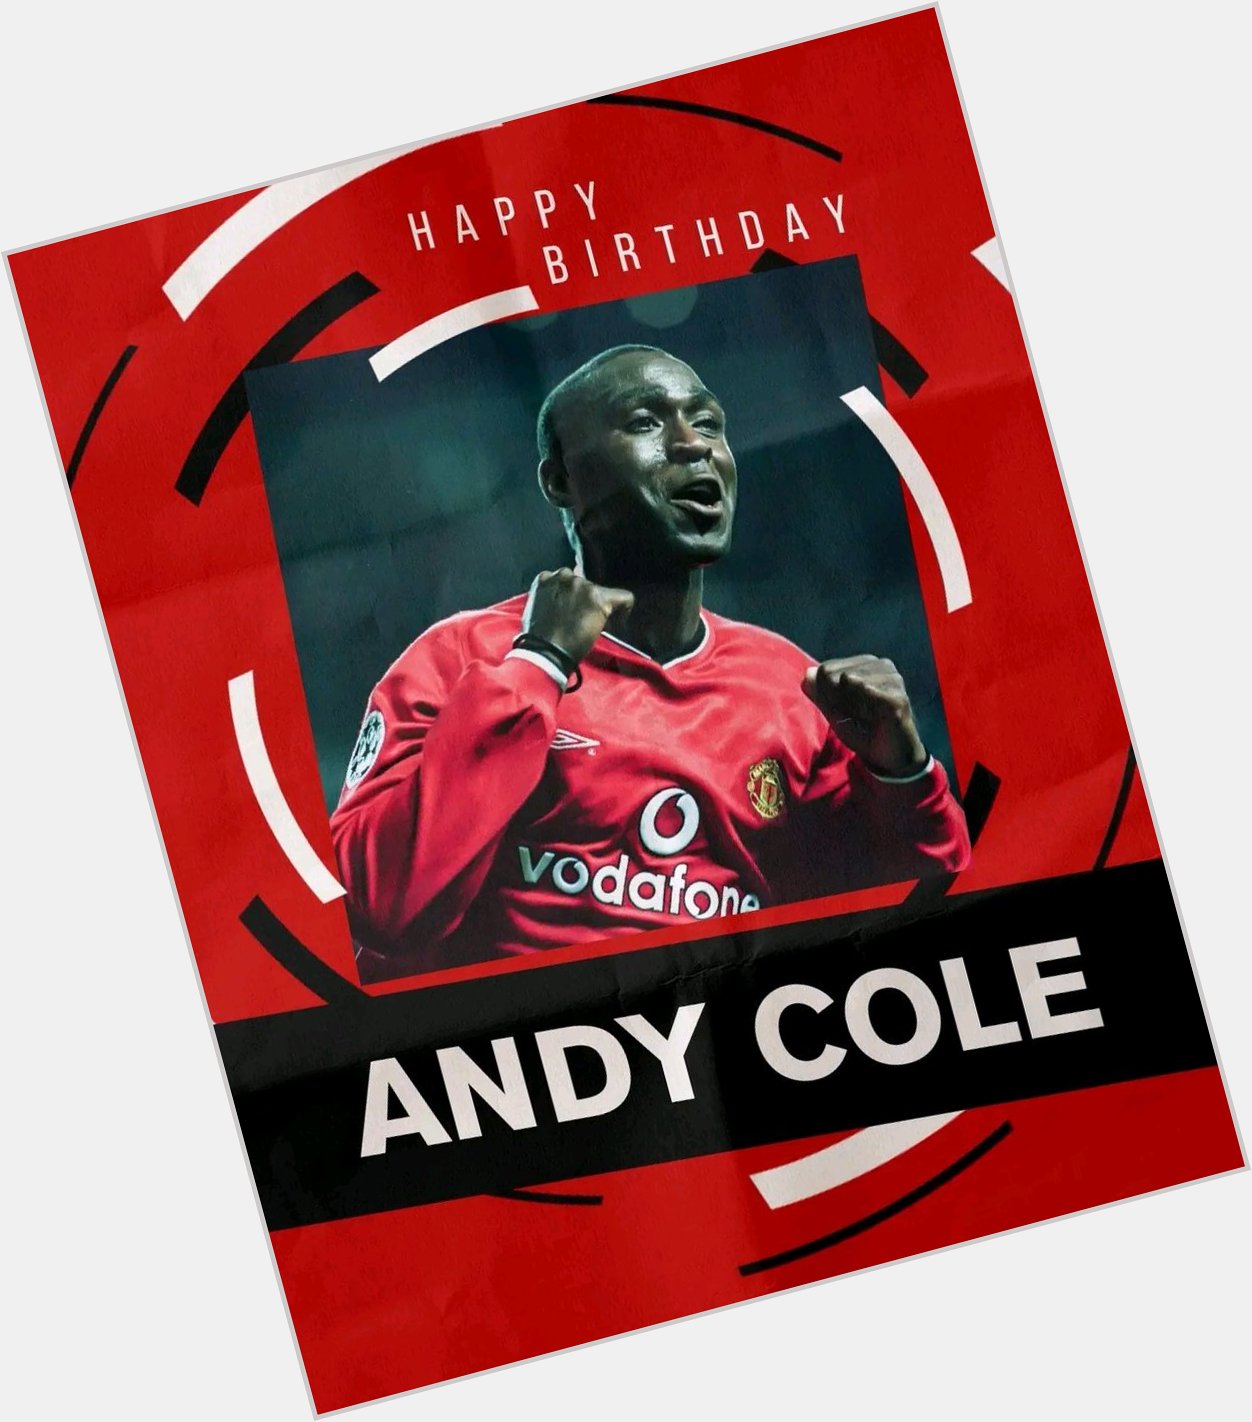 Happy 51st birthday to Andy Cole 